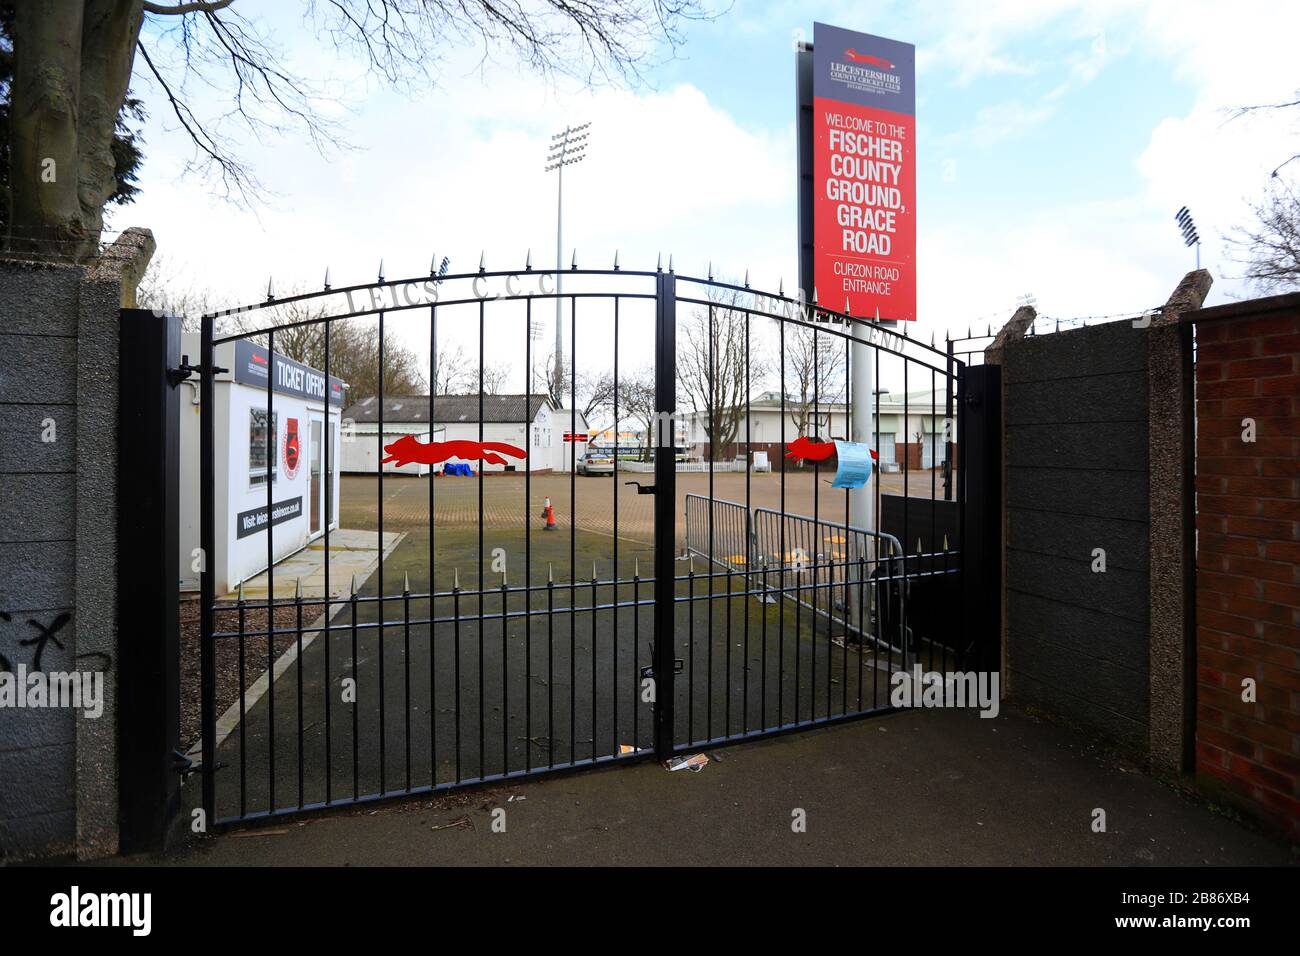 A general view of closed gates at Fischer County Ground home of Leicestershire County Cricket Club after it was announced that The England and Wales Cricket Board (ECB) has recommended all forms of recreational cricket be suspended indefinitely because of coronavirus. Stock Photo